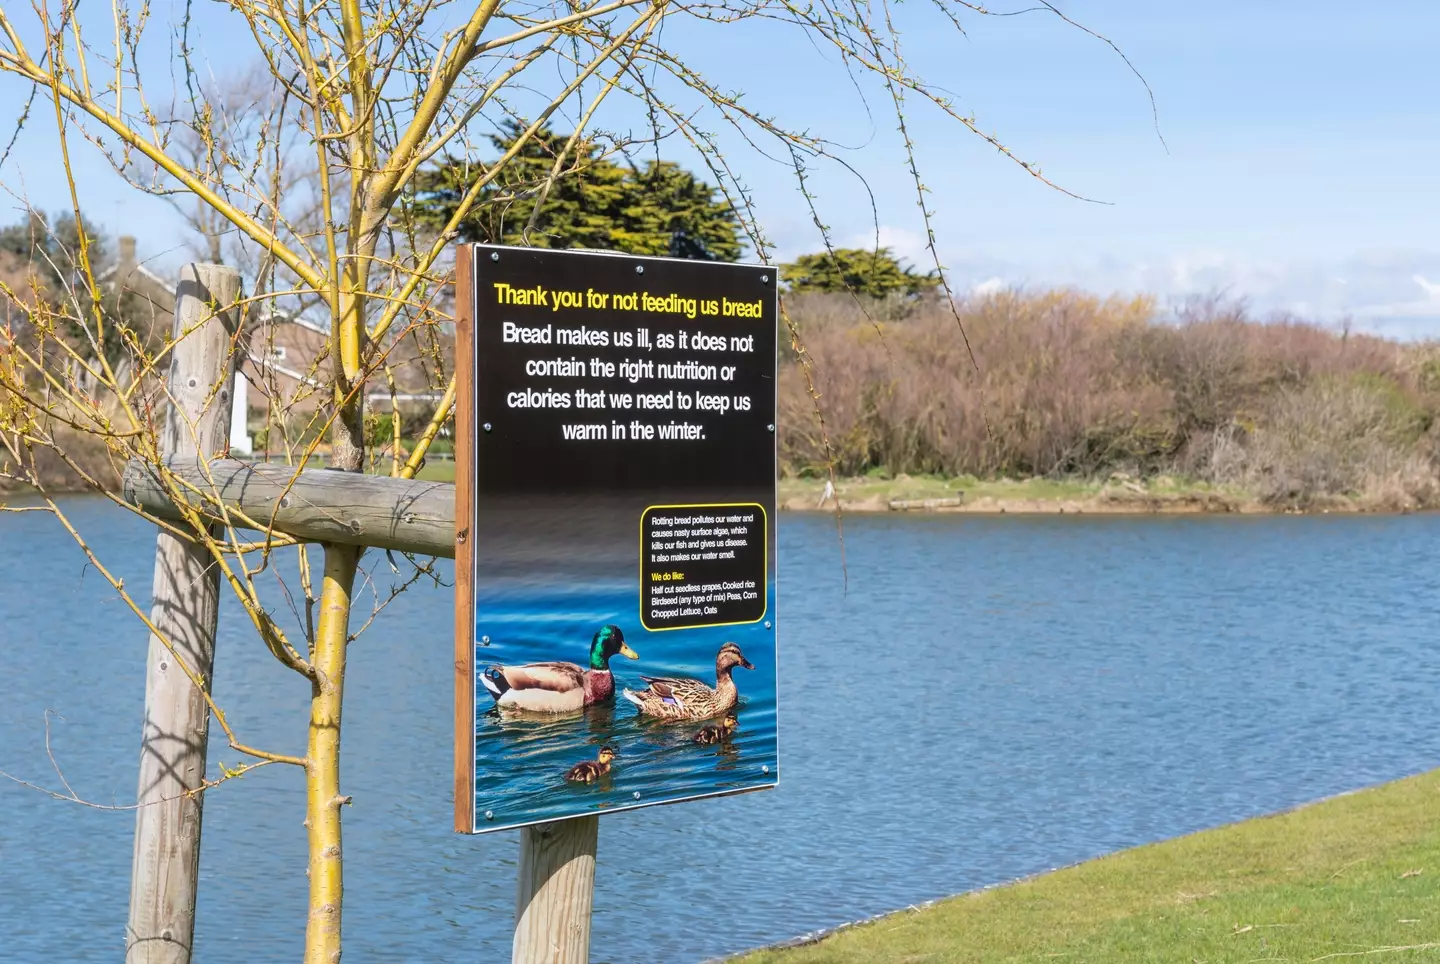 Though small amounts of bread is OK, some places ask people not to feed the ducks.